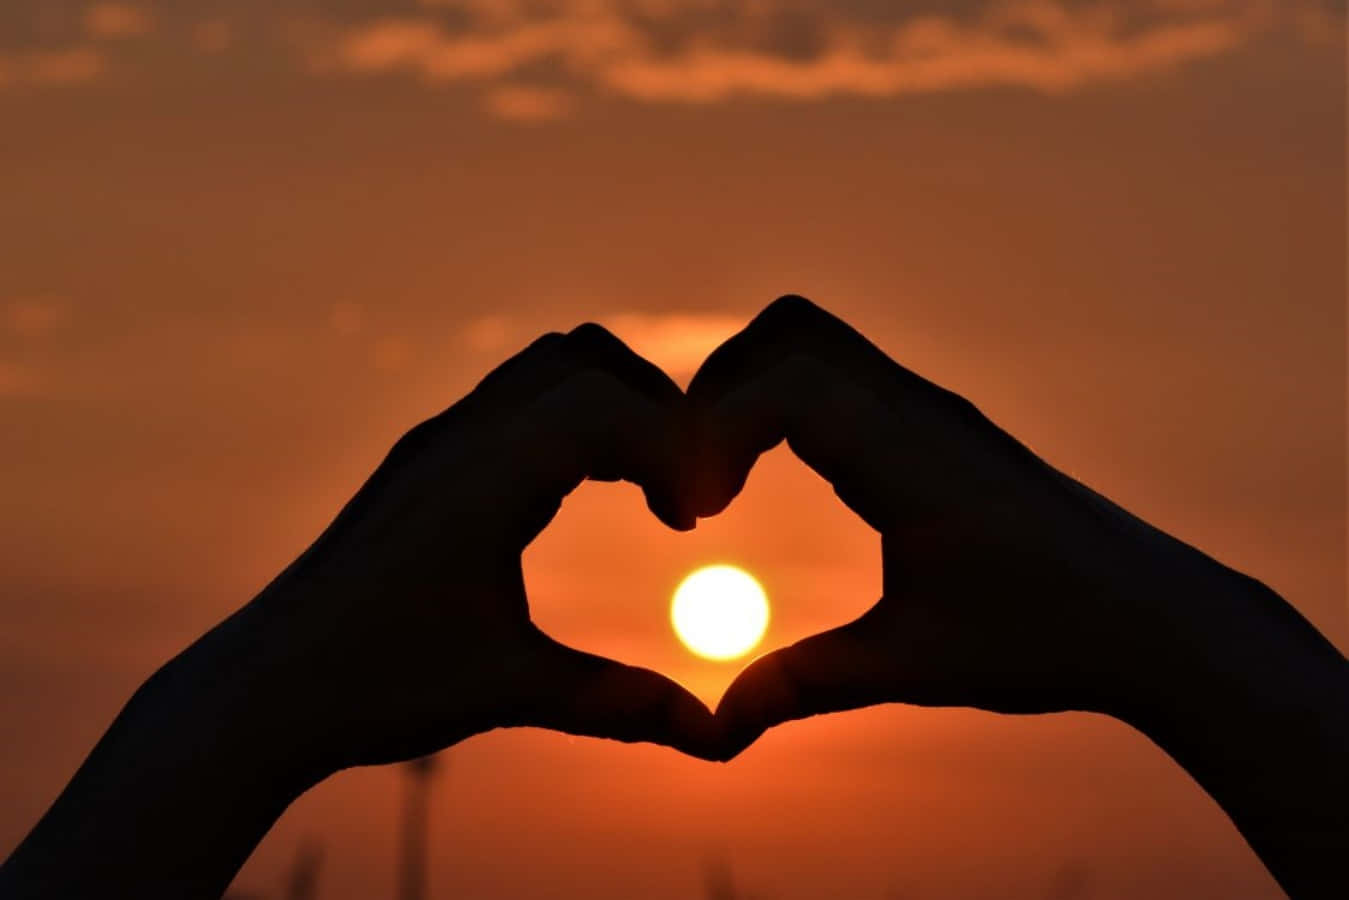 Heart Silhouette on a Blurred Background Wallpaper